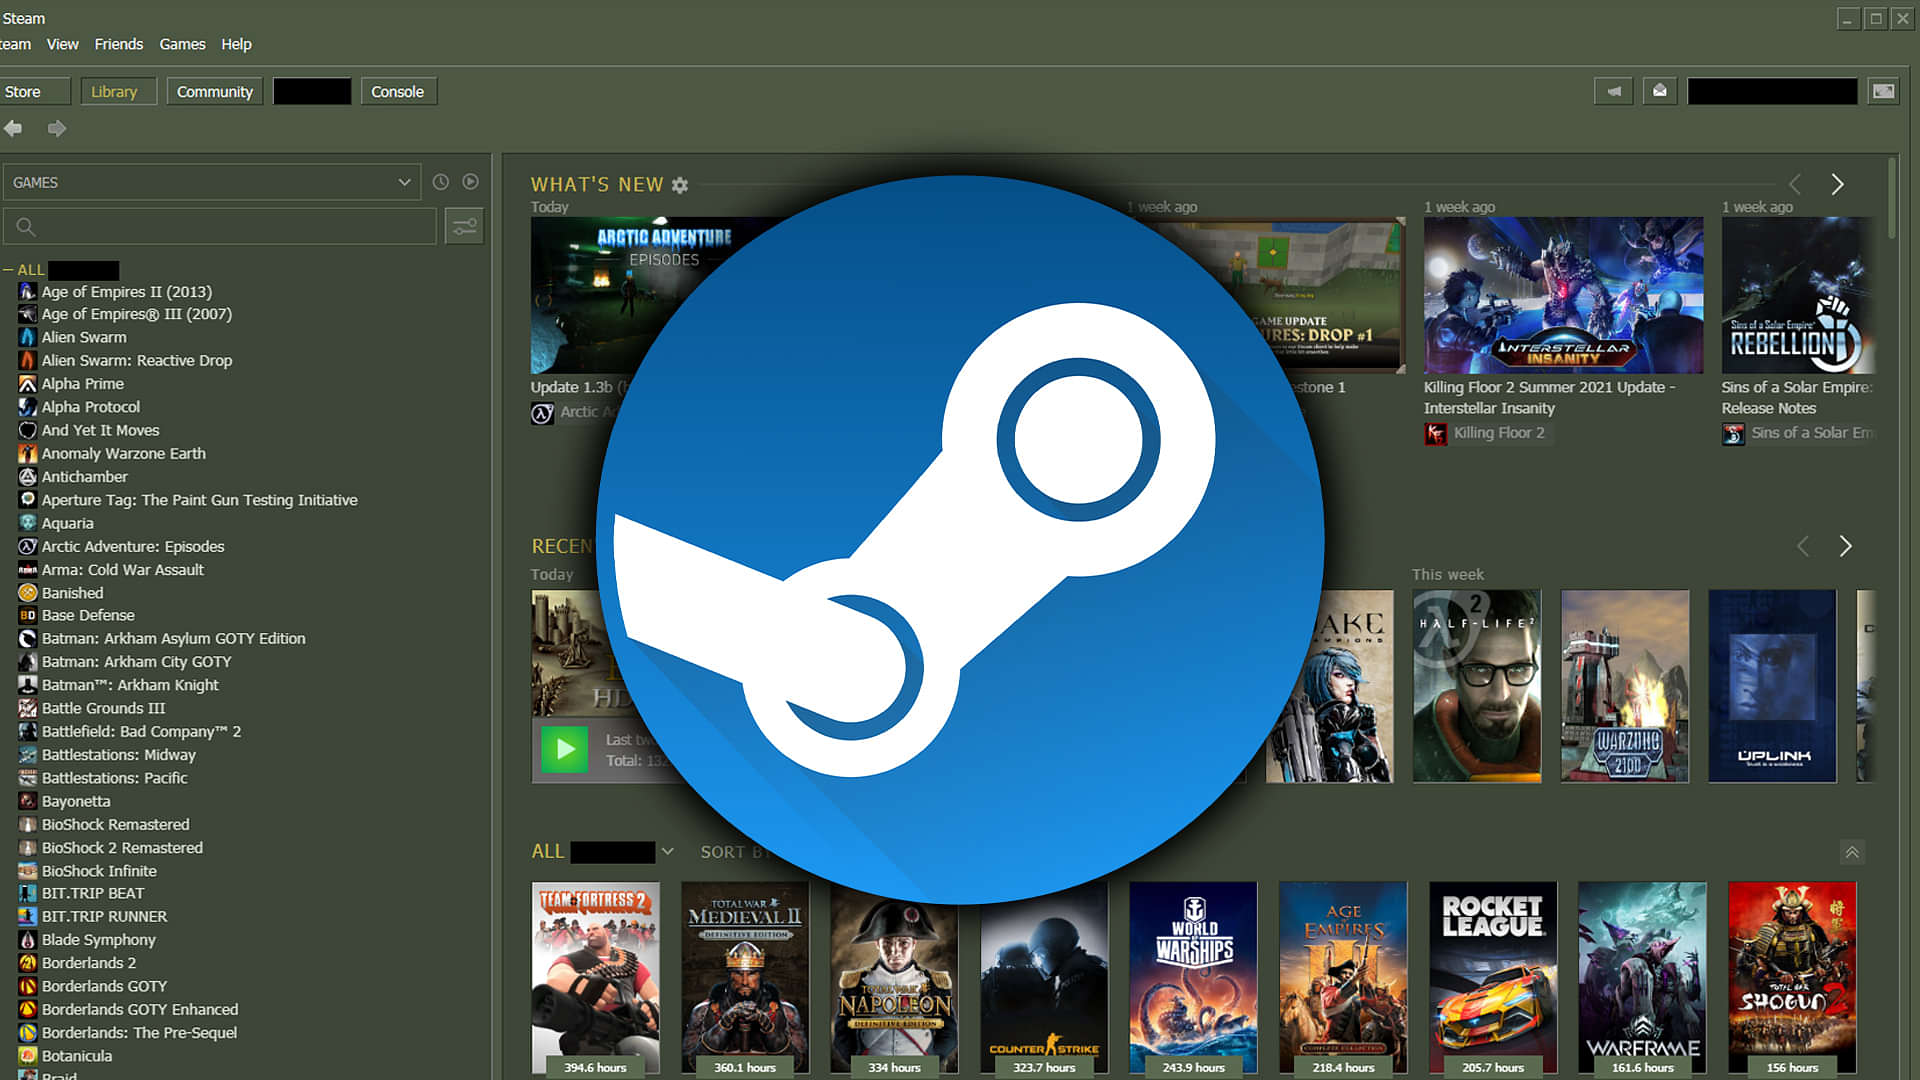 Game over, or not: what became of Steam's first Early Access games?, Steam